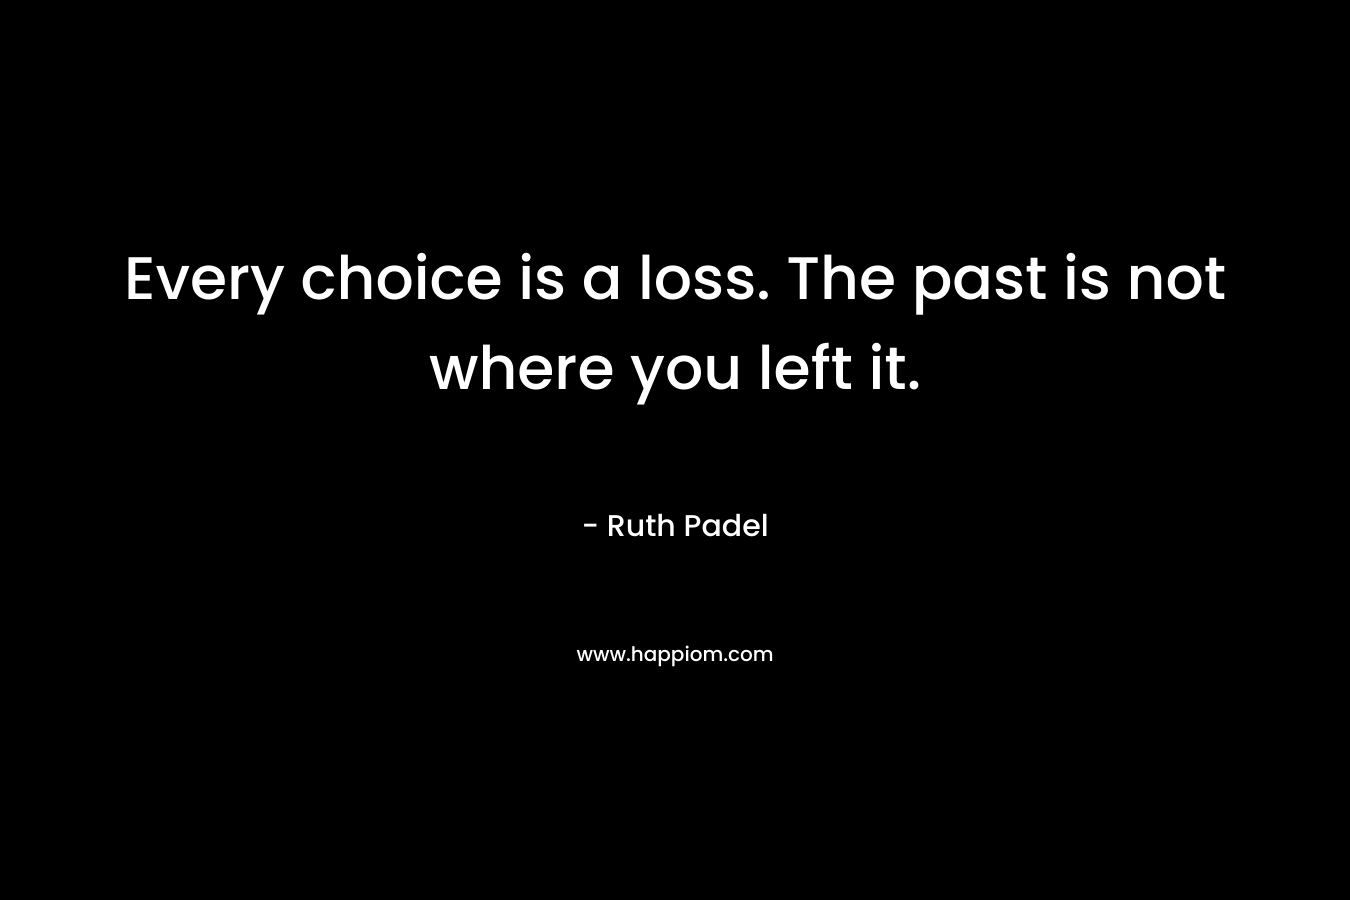 Every choice is a loss. The past is not where you left it.